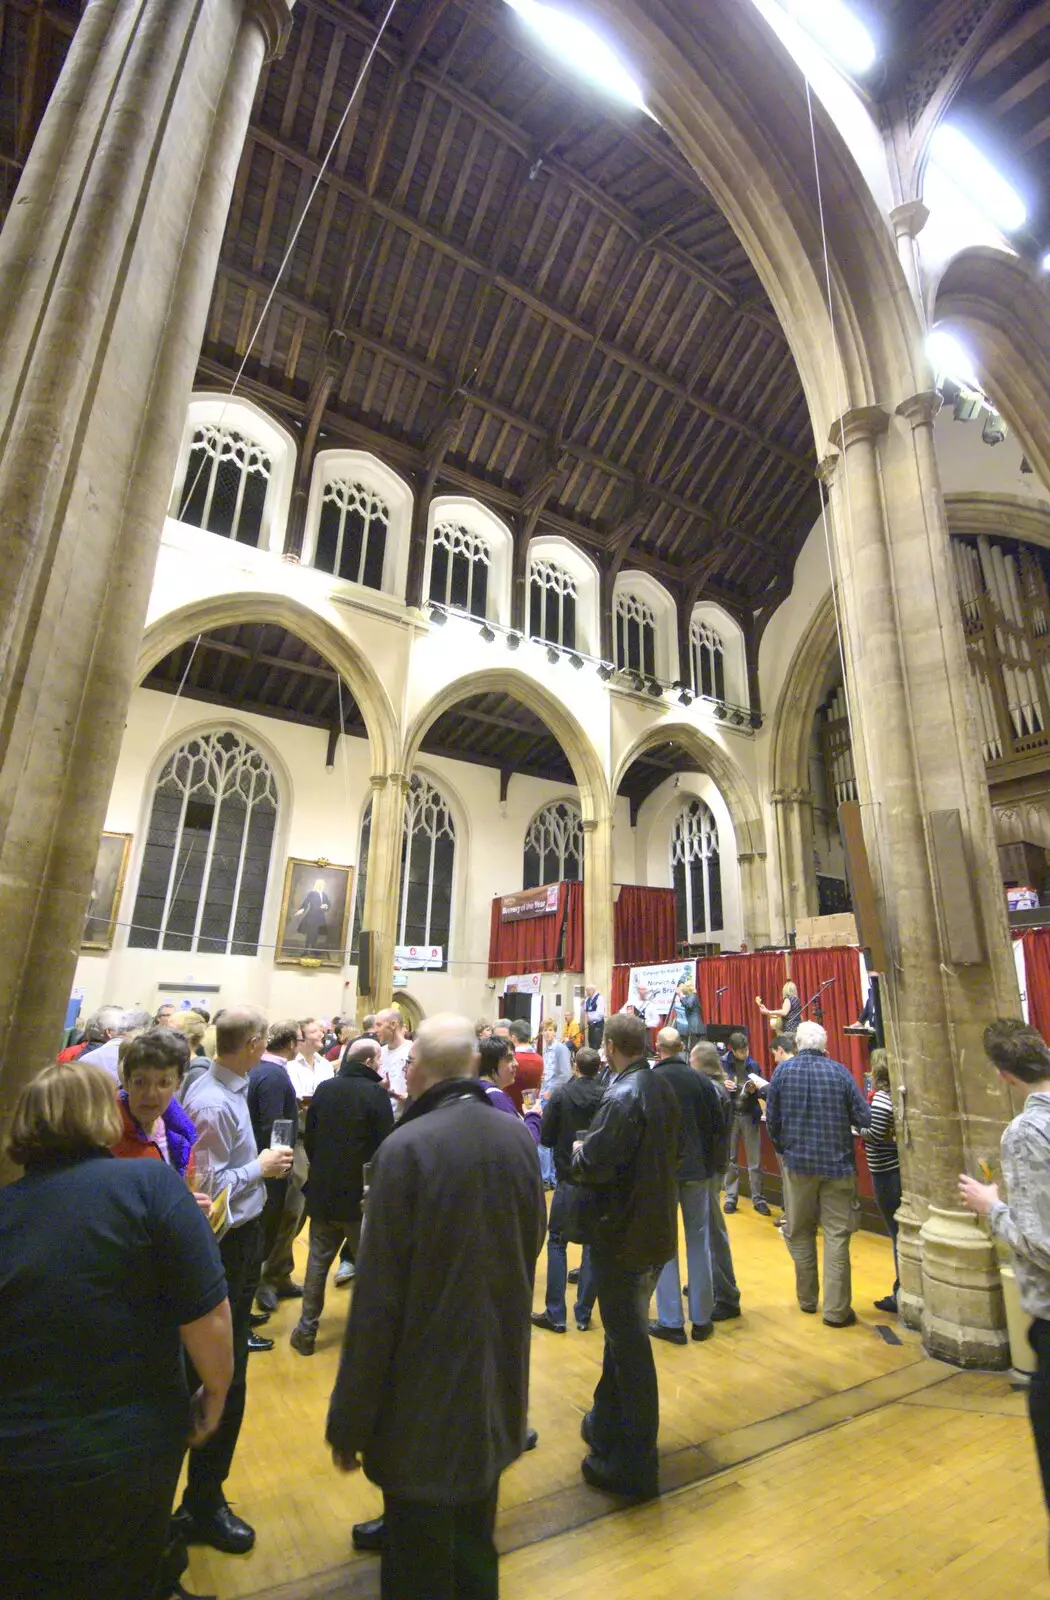 St. Andrew's Hall, from The Norwich Beer Festival, St. Andrew's Hall, Norwich, Norfolk - 27th October 2010